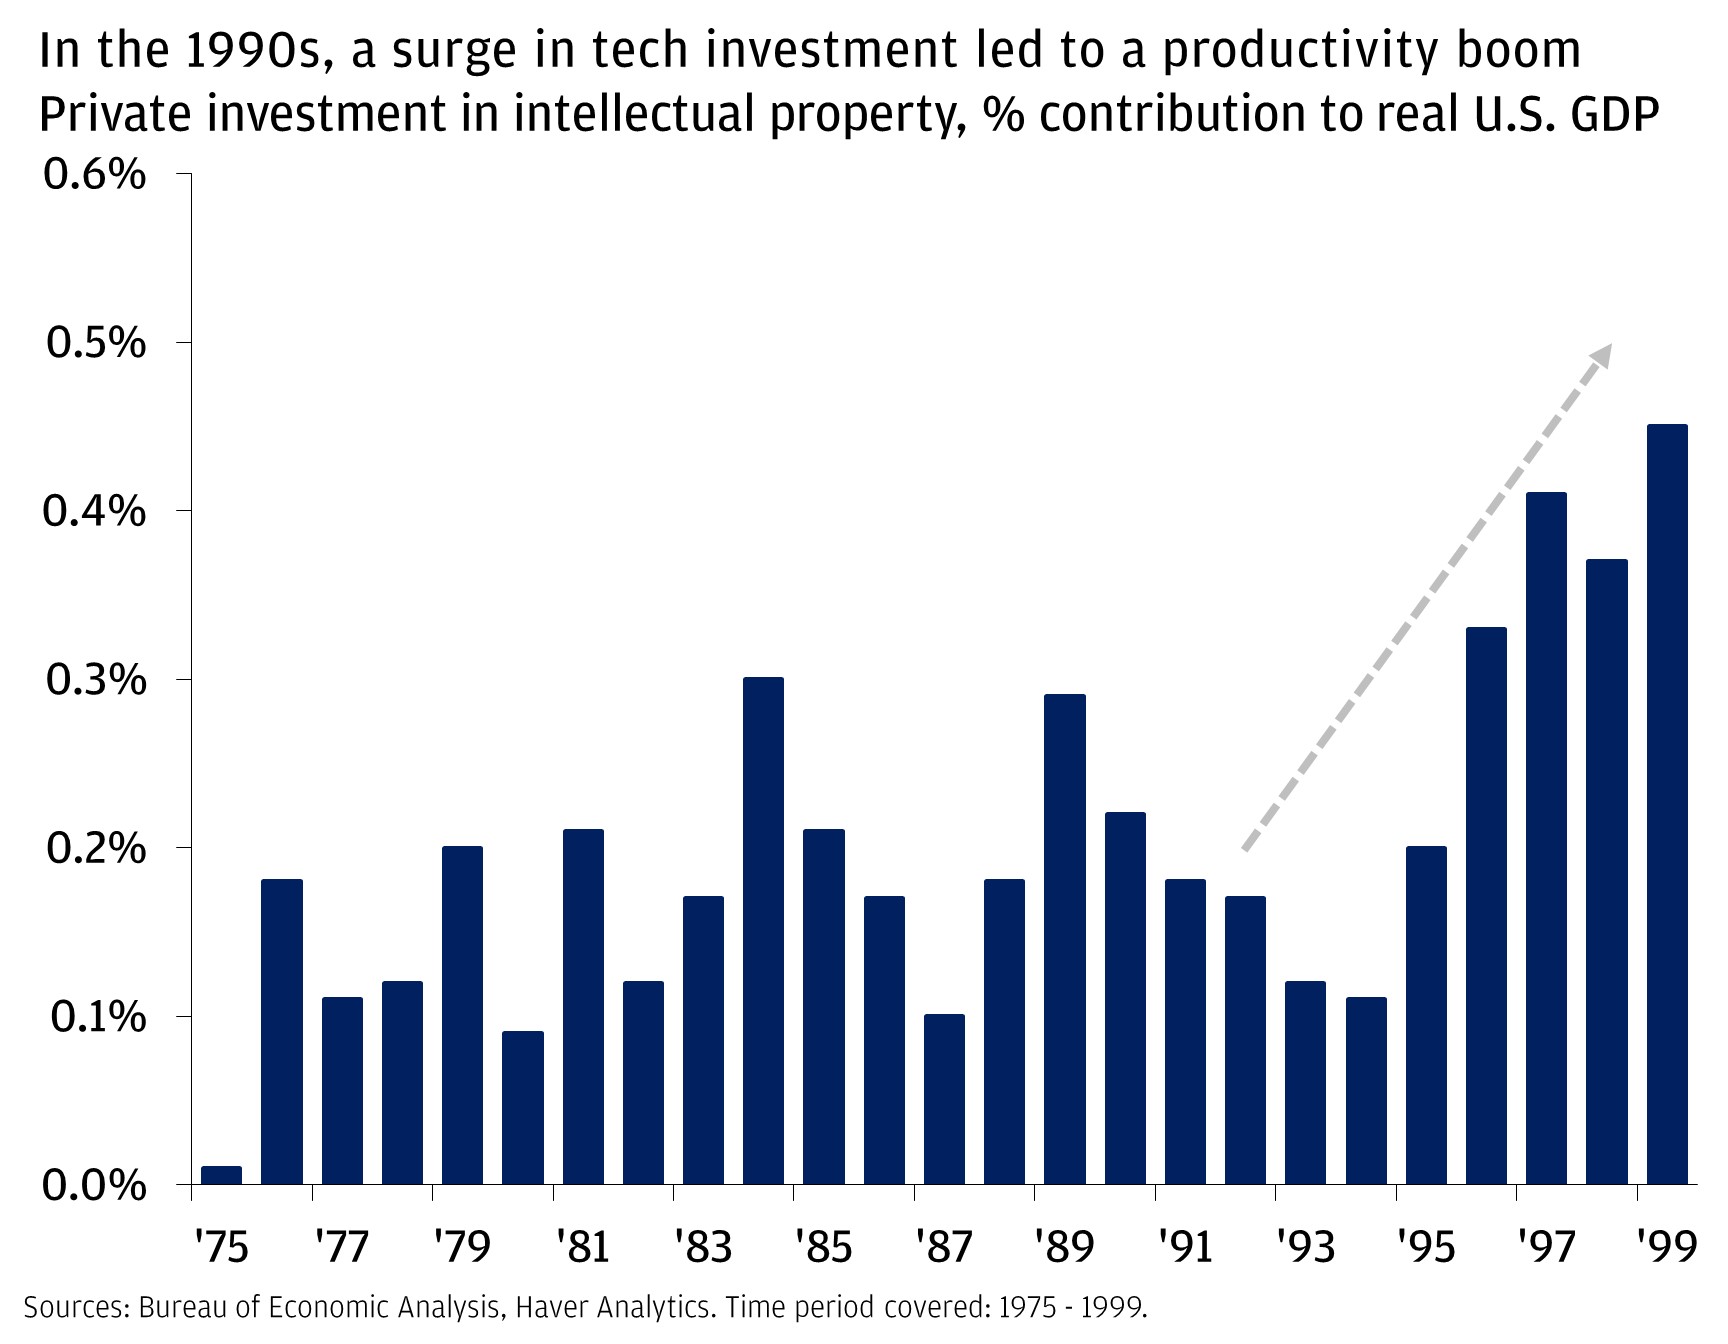 In the 1990s, a surge in tech investment led to a productivity boom